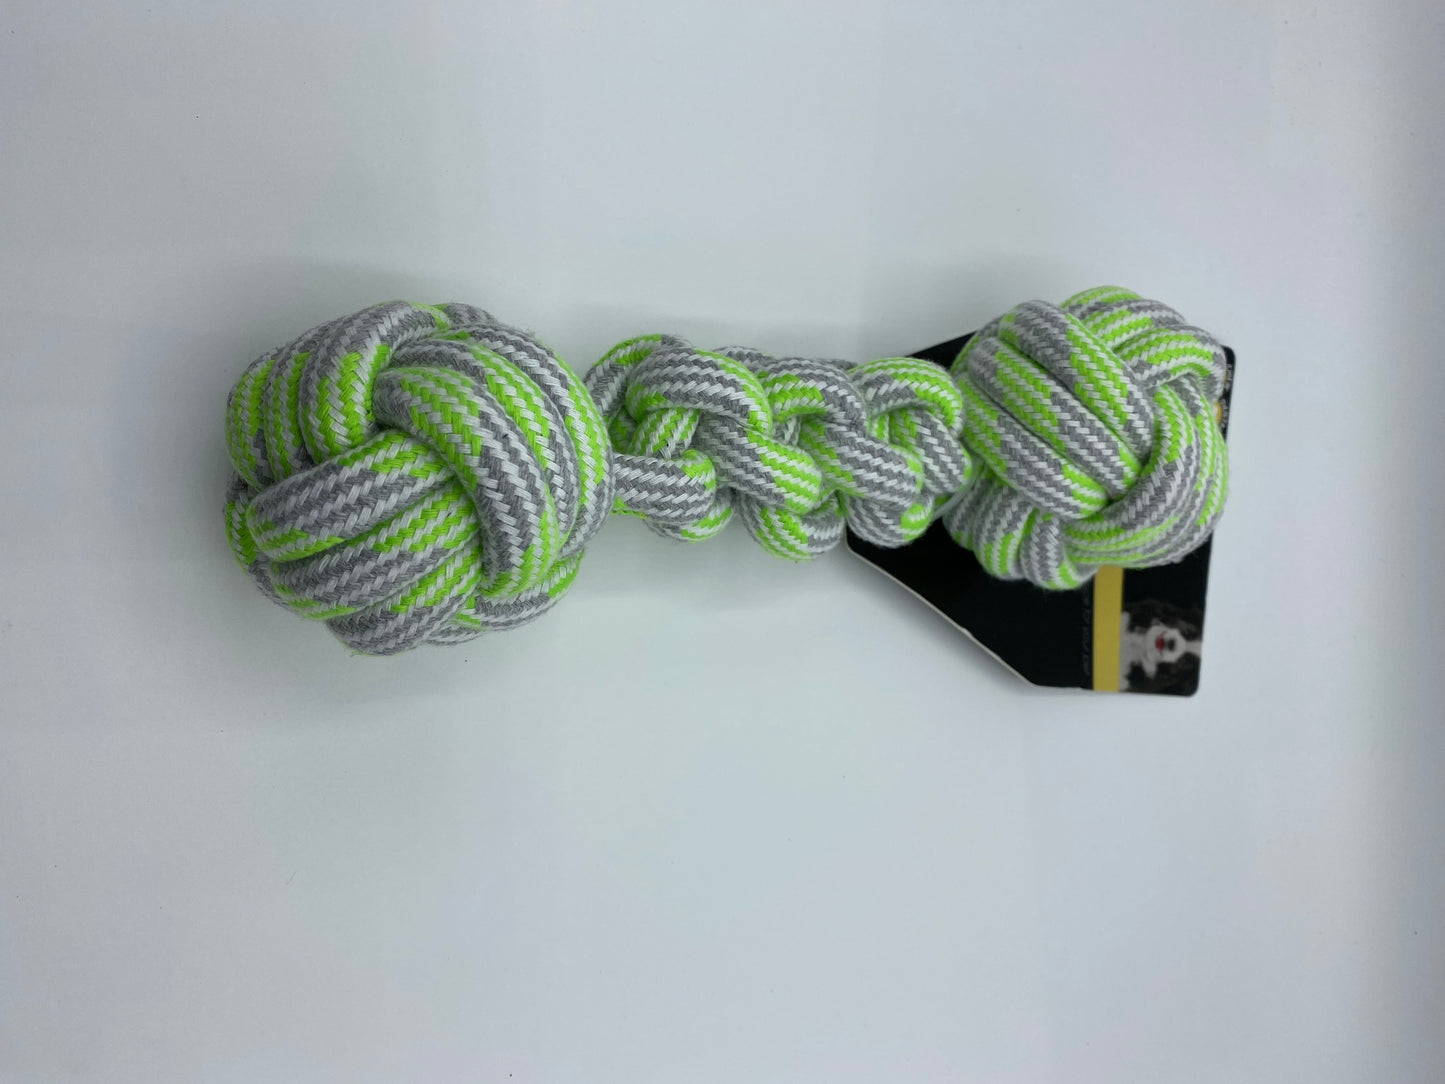 Dumbbell Shape Rope/Tug Dog Toy Size approx 25cm Long in Pink, Yellow and Green